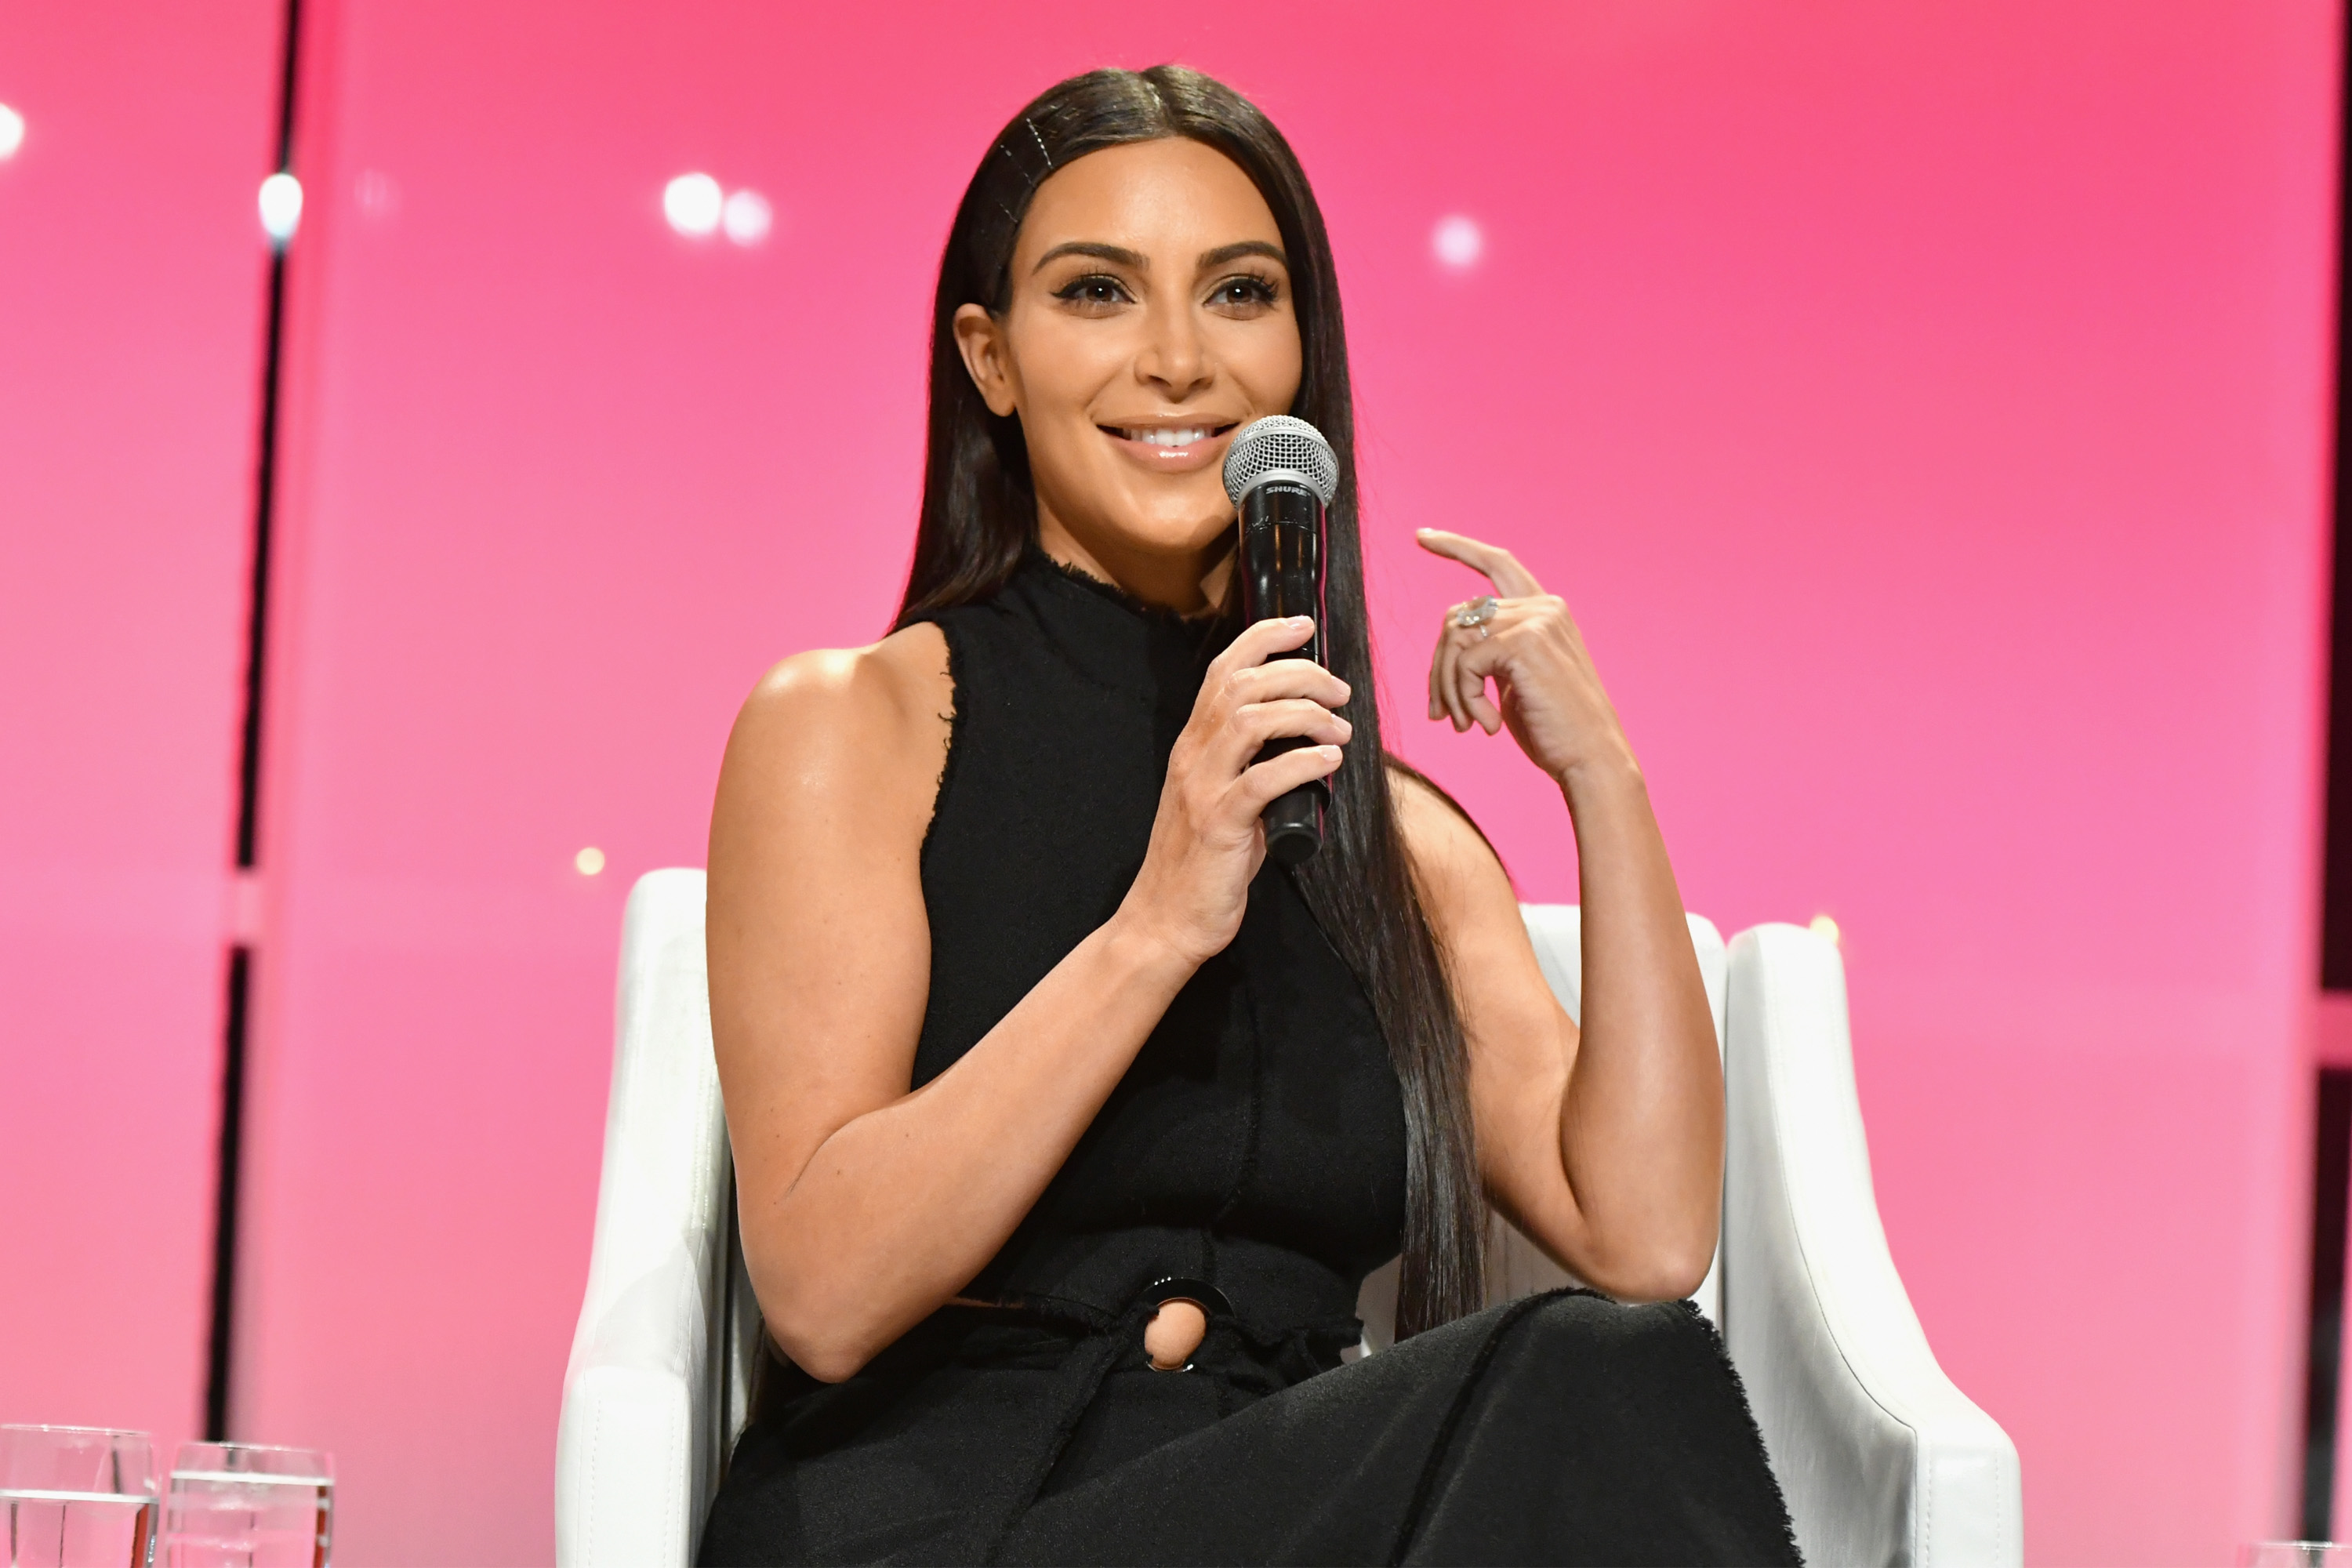 NEW YORK, NY - SEPTEMBER 27: (EXCLUSIVE ACCESS, SPECIAL RATES APPLY) Kim Kardashian-West speaks at The Girls' Lounge dinner, giving visibility to women at Advertising Week 2016, at Pier 60 on September 27, 2016 in New York City.   Slaven Vlasic/Getty Images for The Girls' Lounge/AFP